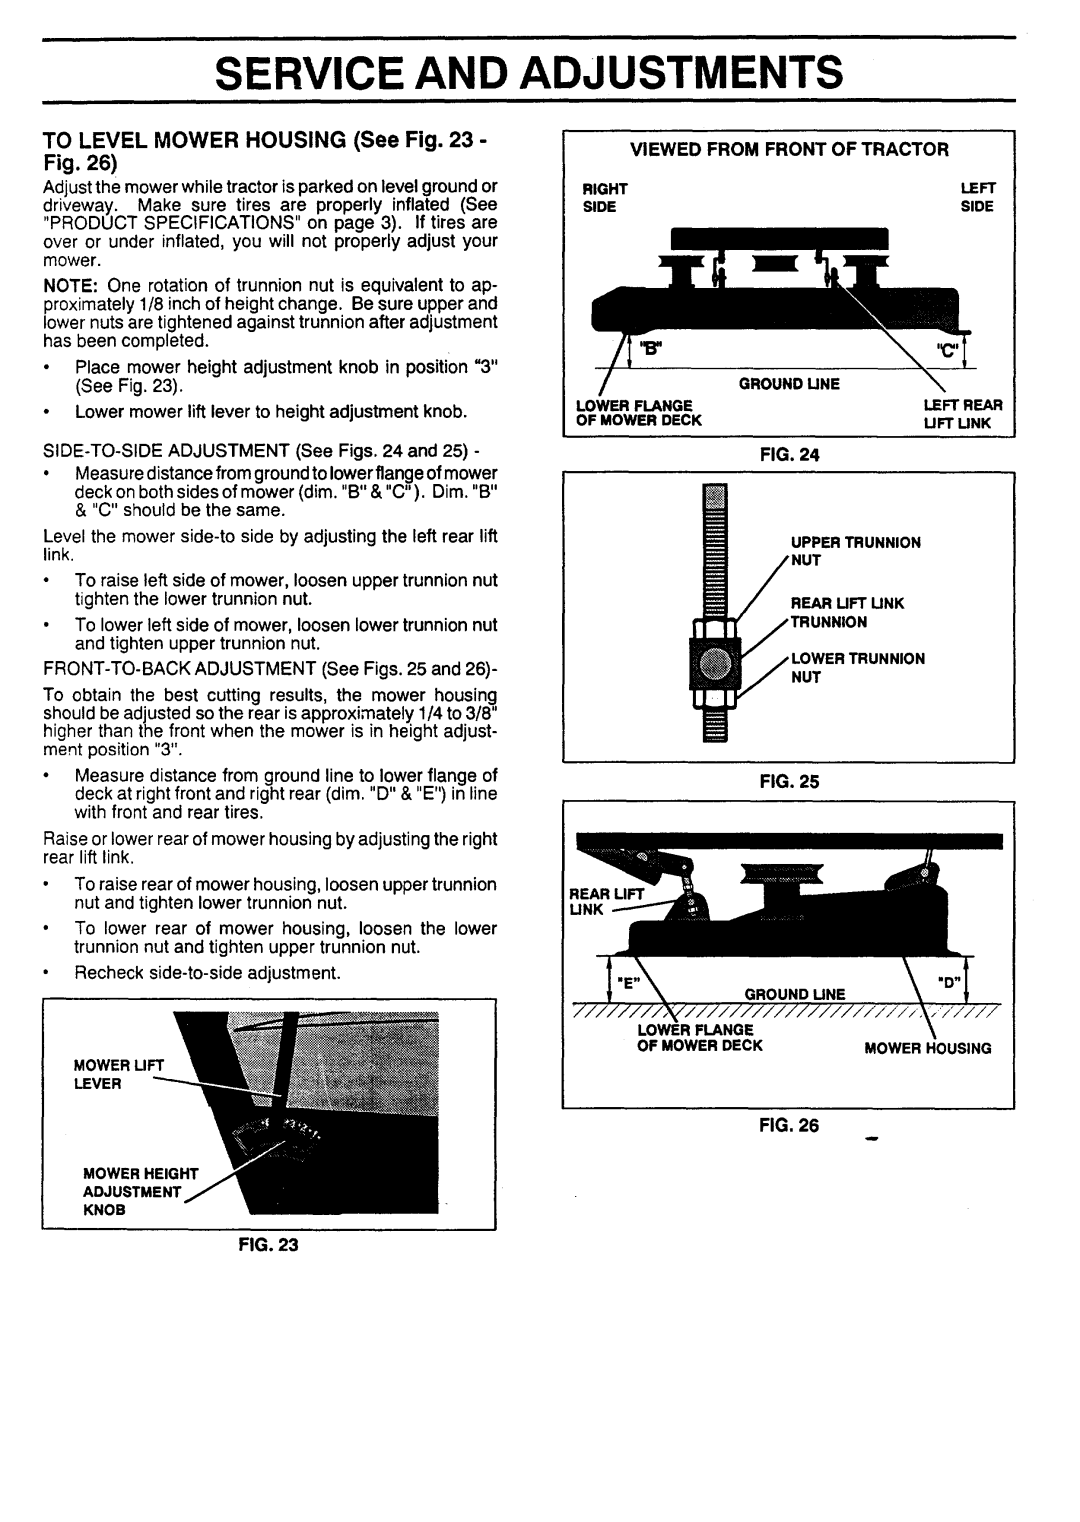 Sears 917.257462 manual Service And Adjustments, TO LEVEL MOWER HOUSING See Fig 